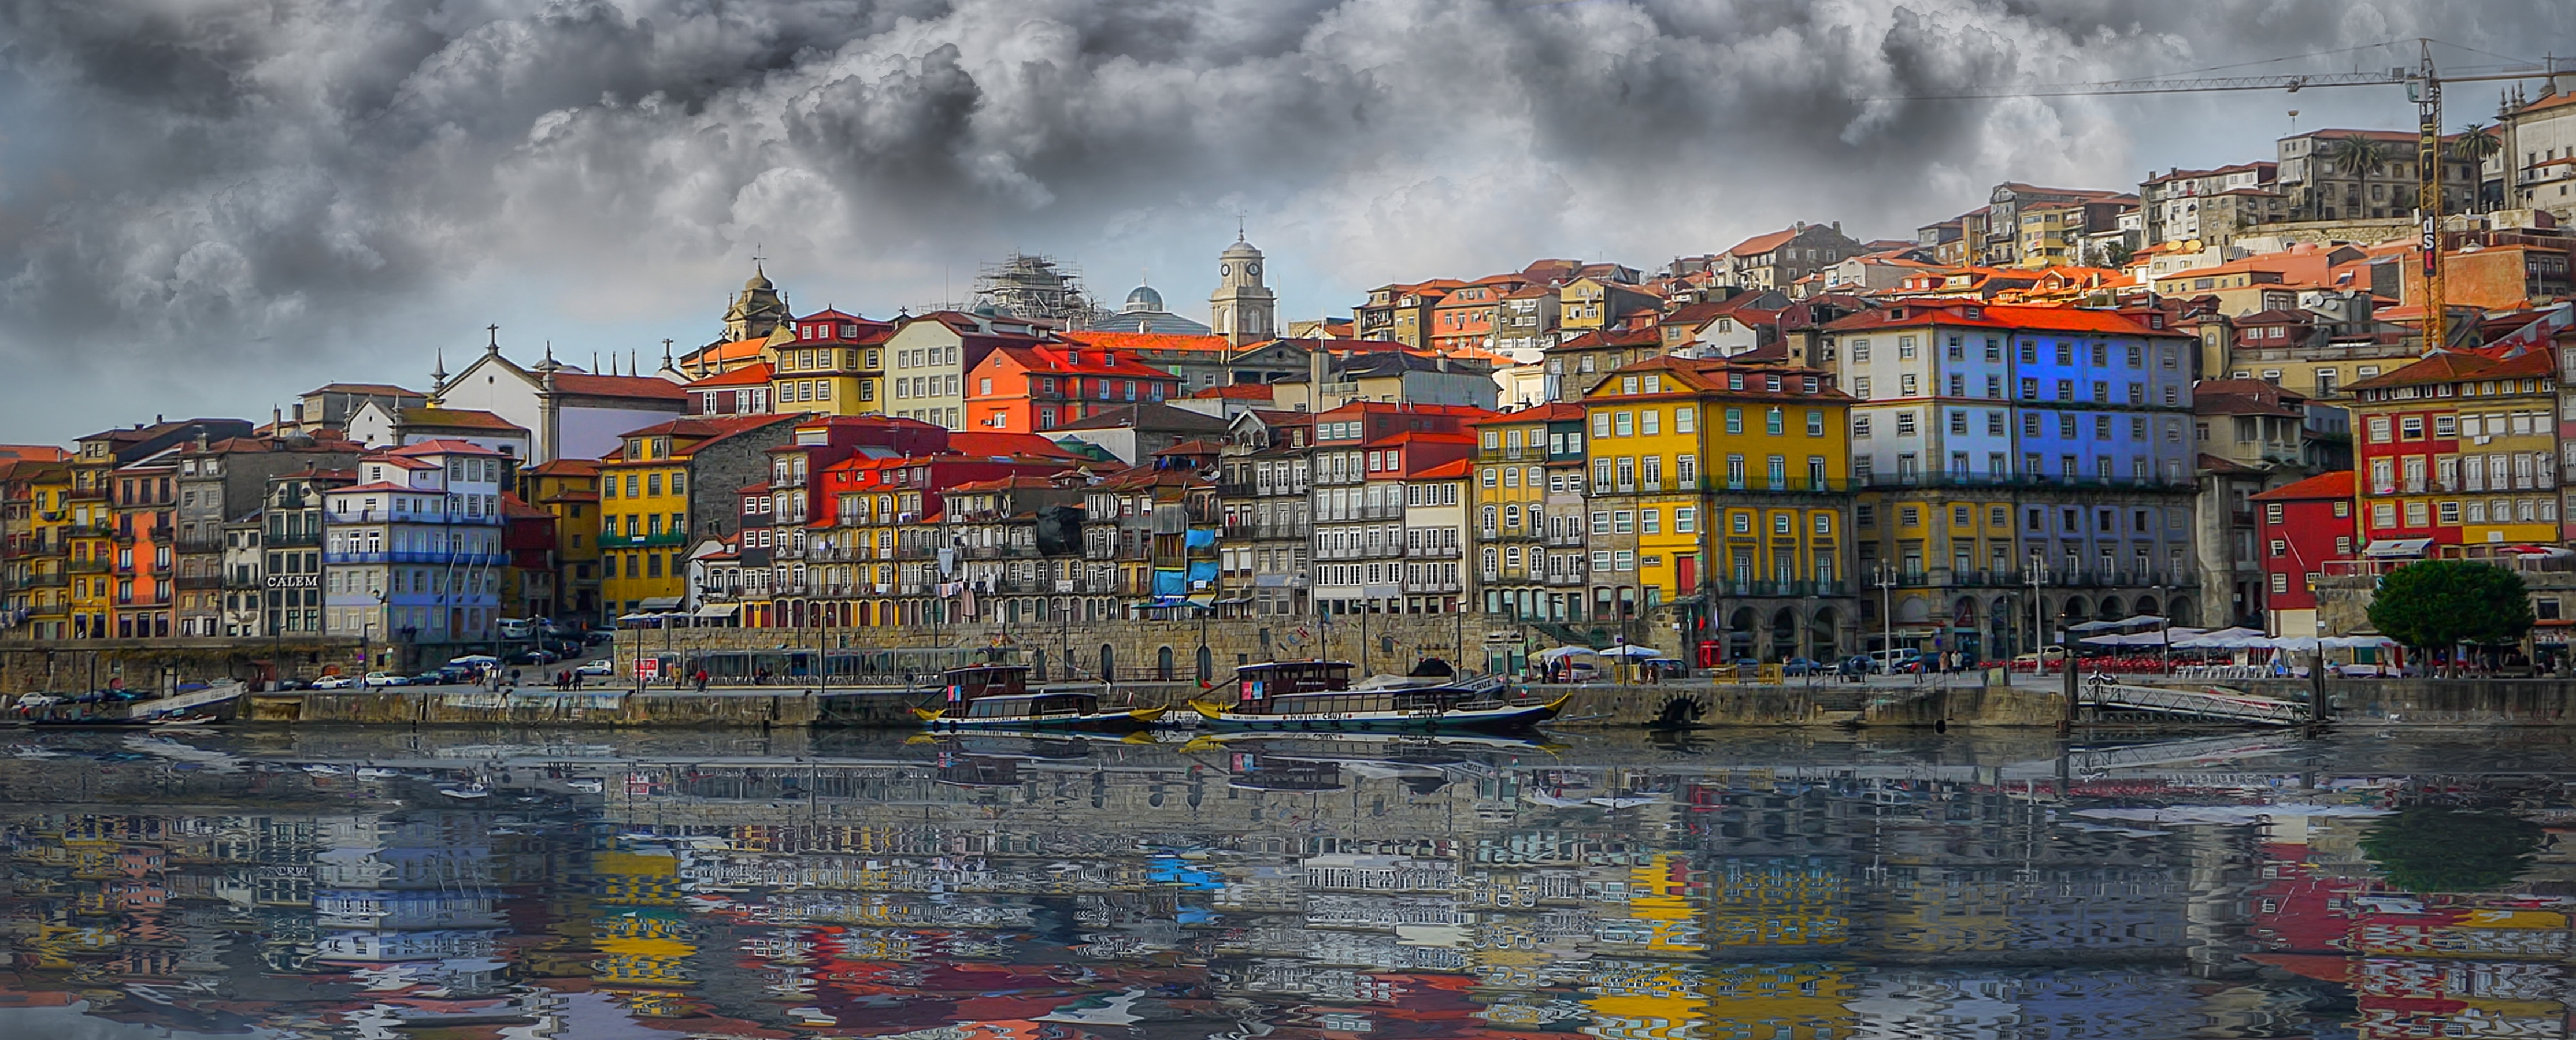 man made, porto, cloud, colorful, house, lake, portugal, reflection, town, cities